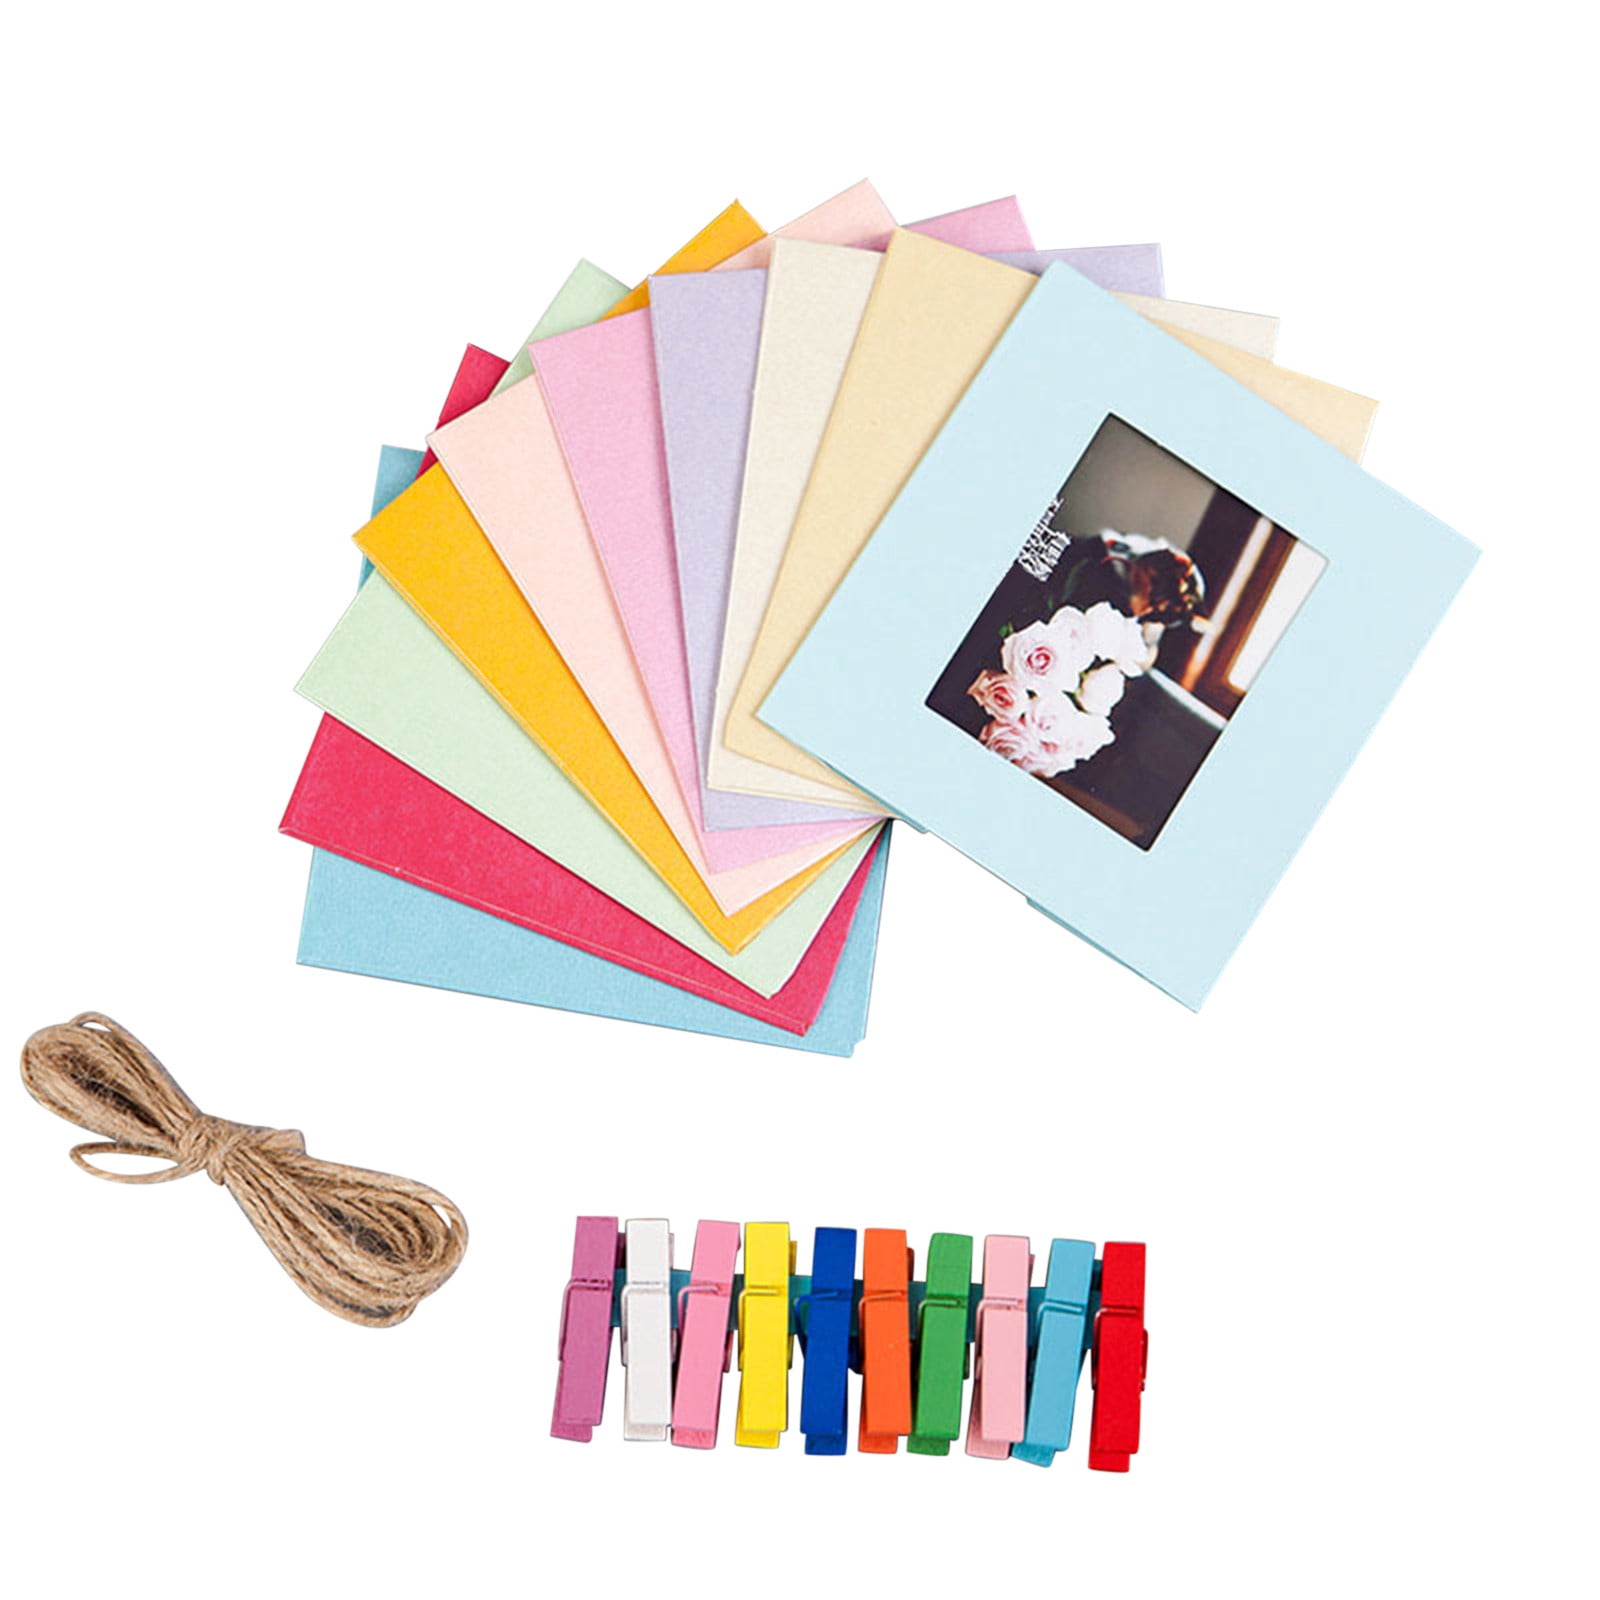 10 set diy wall picture paper photo hanging frame album rope clip decoration DO 